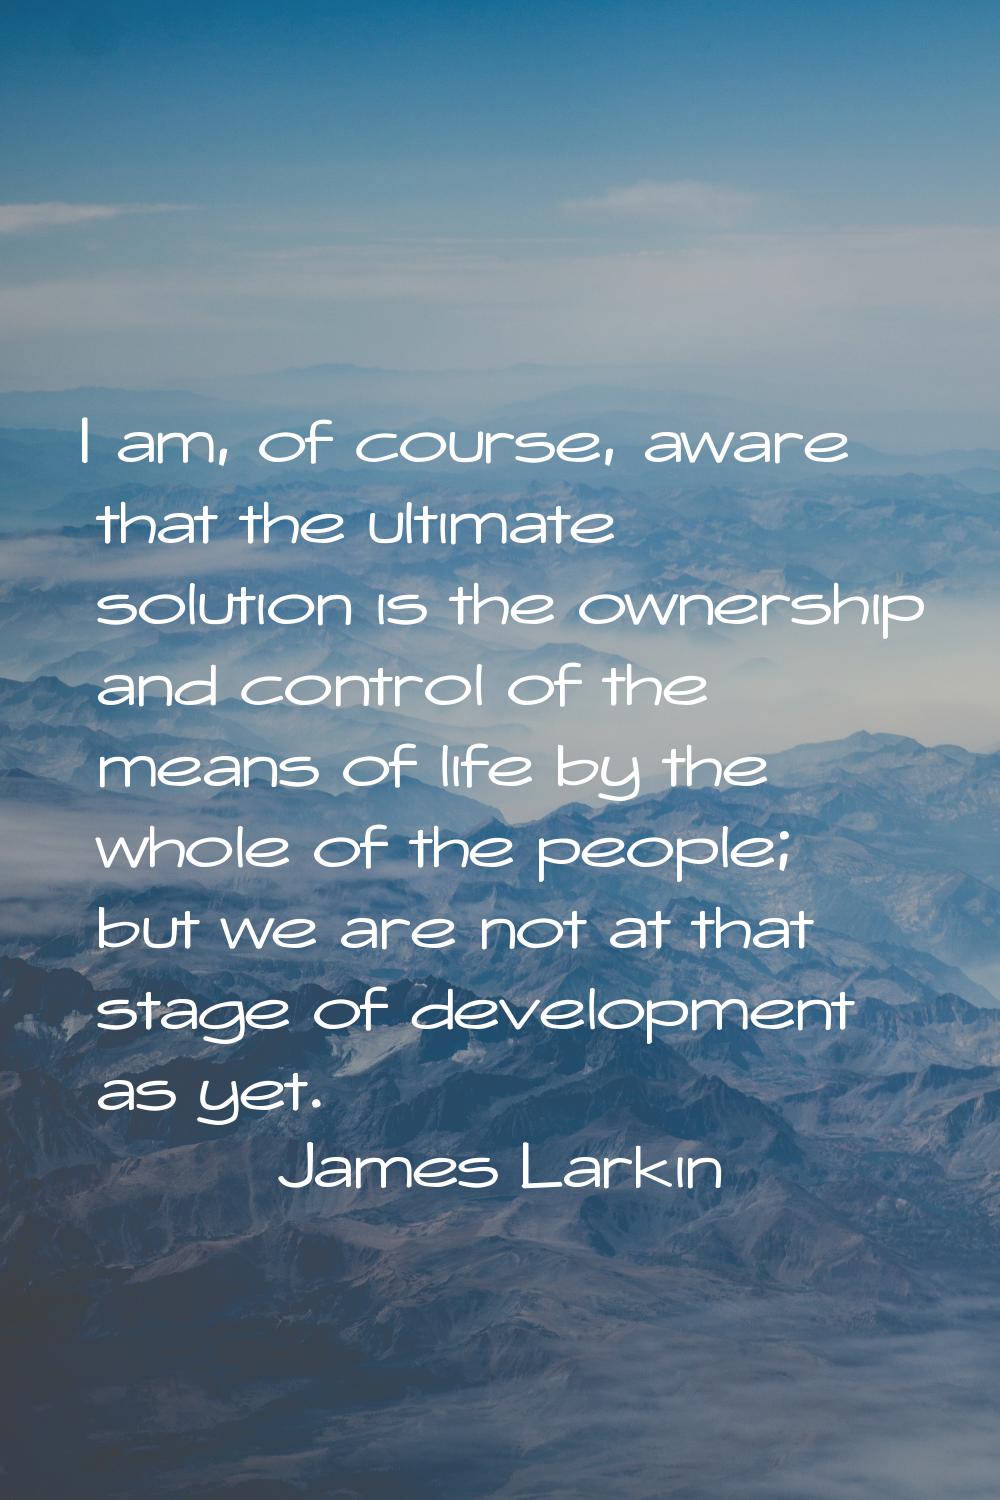 I am, of course, aware that the ultimate solution is the ownership and control of the means of life